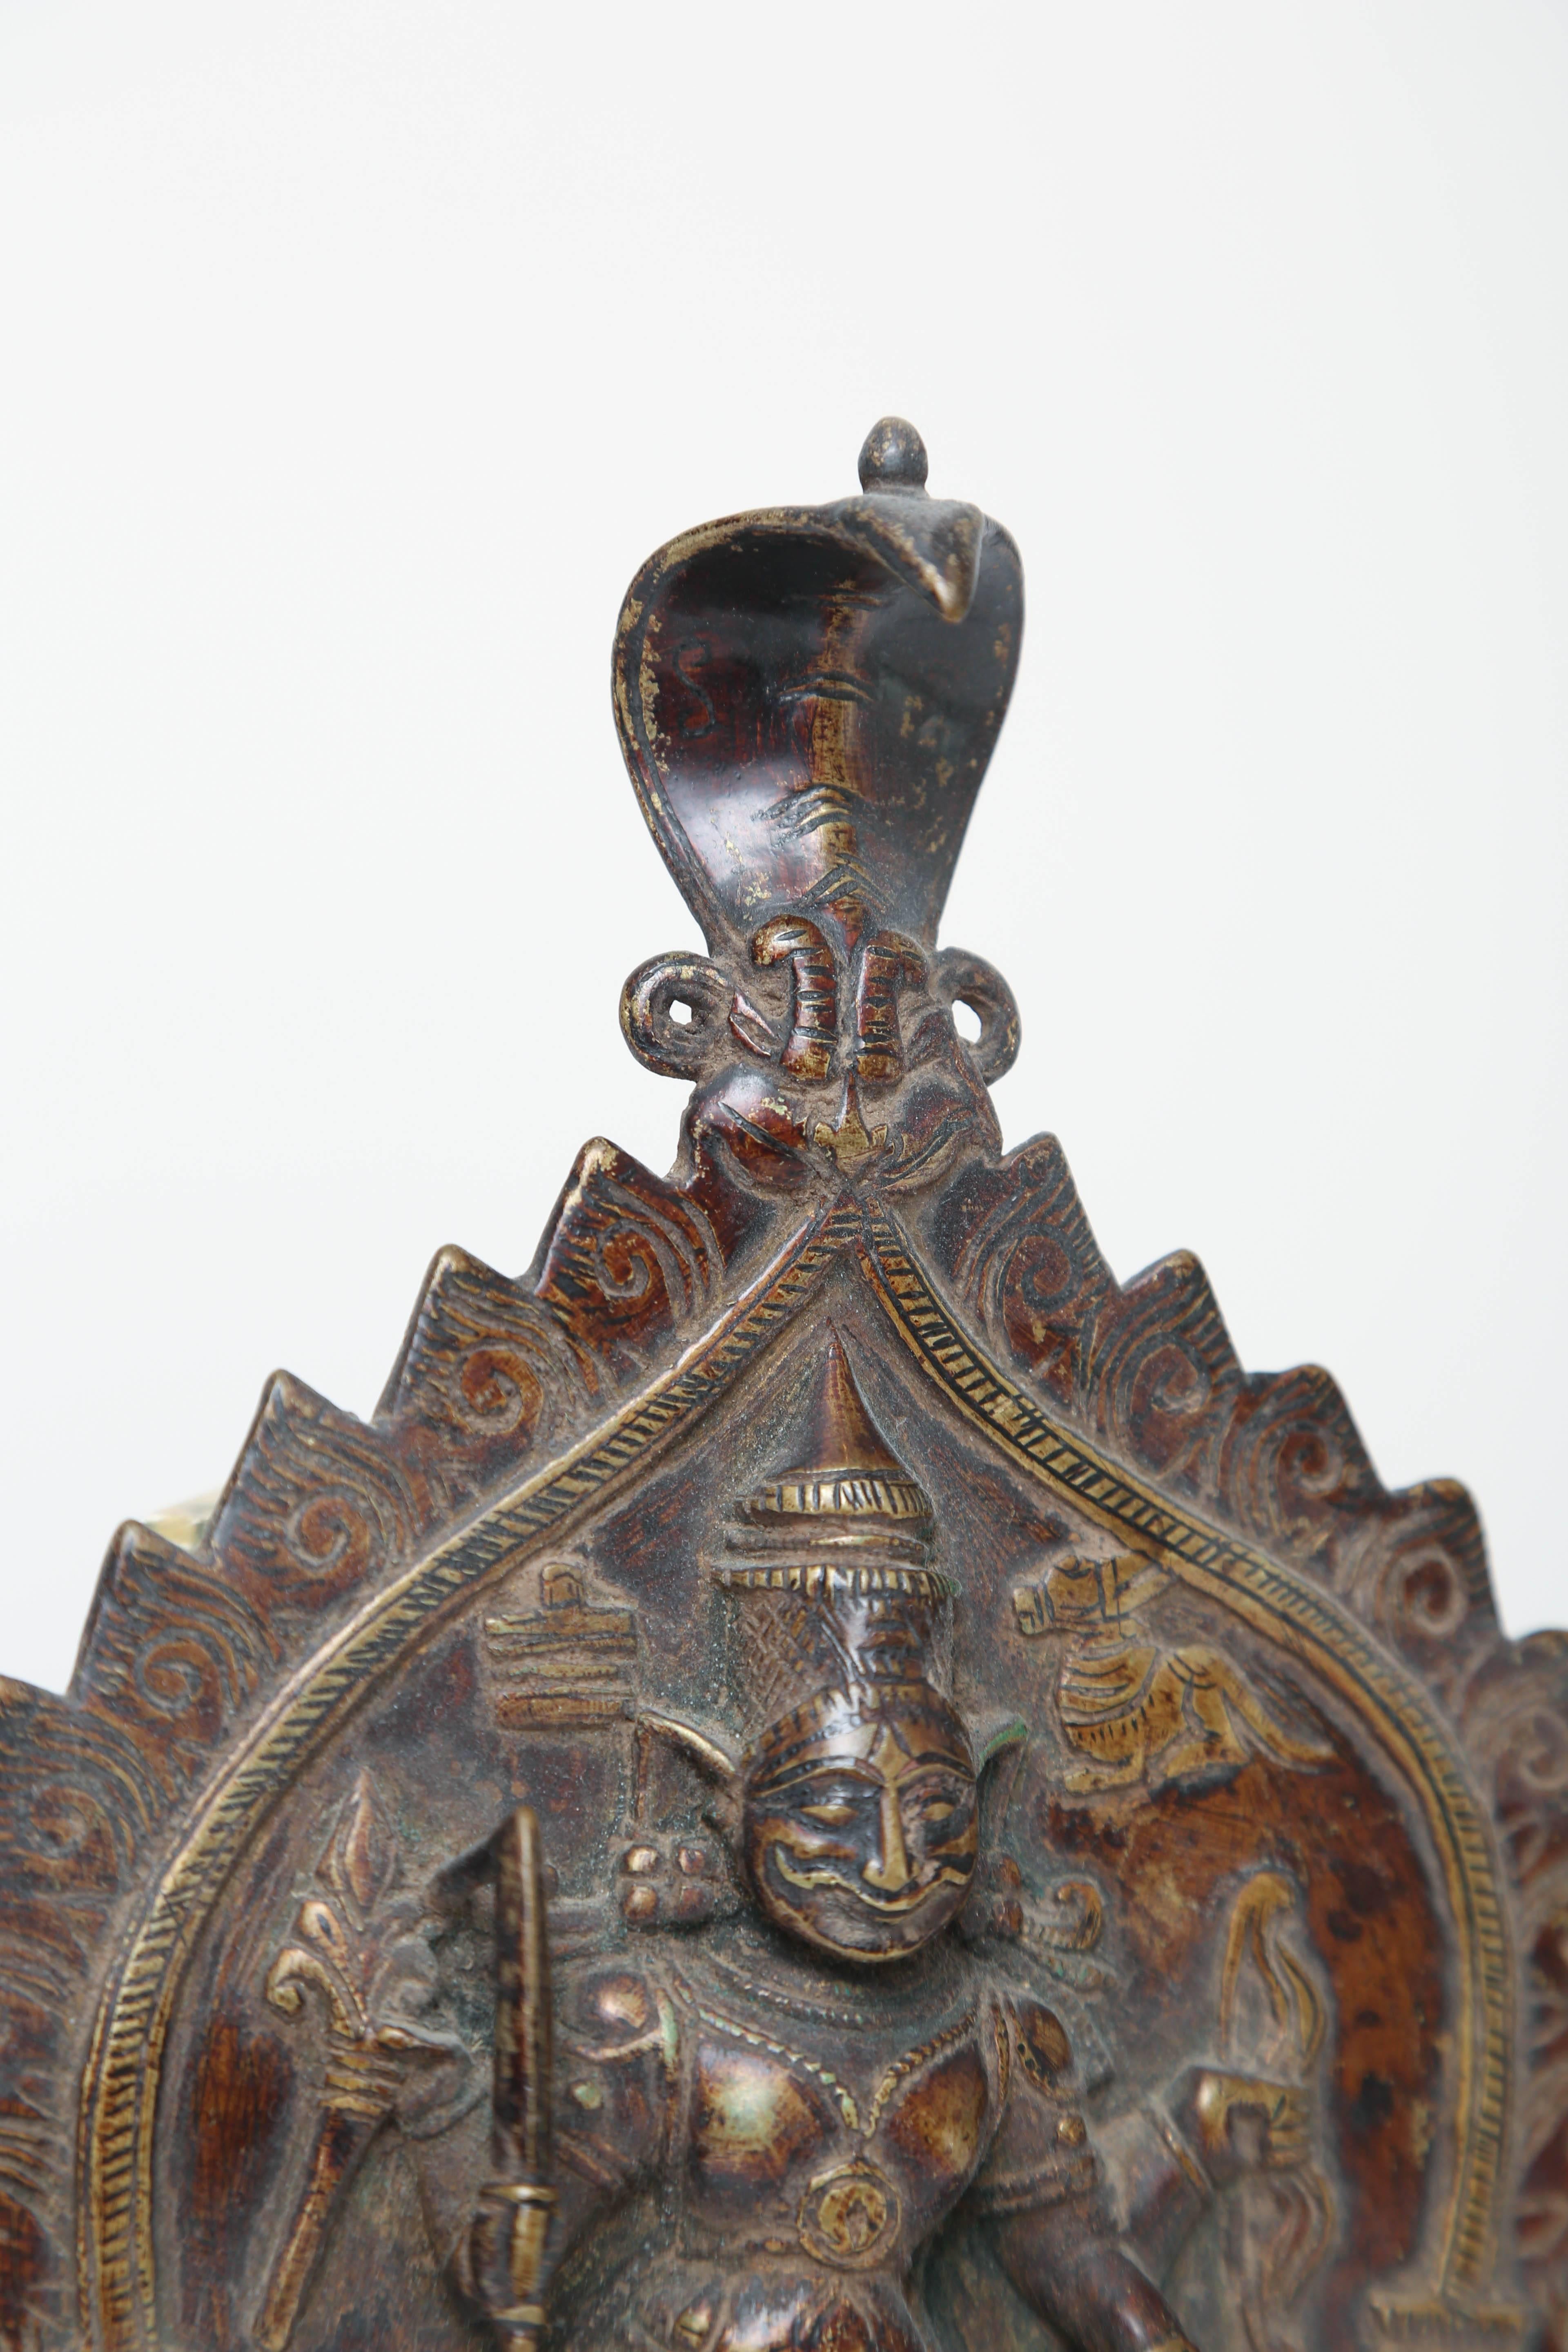 Cast Indian Bronze and Copper Alloy Plaque of Four-Armed Durga, 18th-19th Century